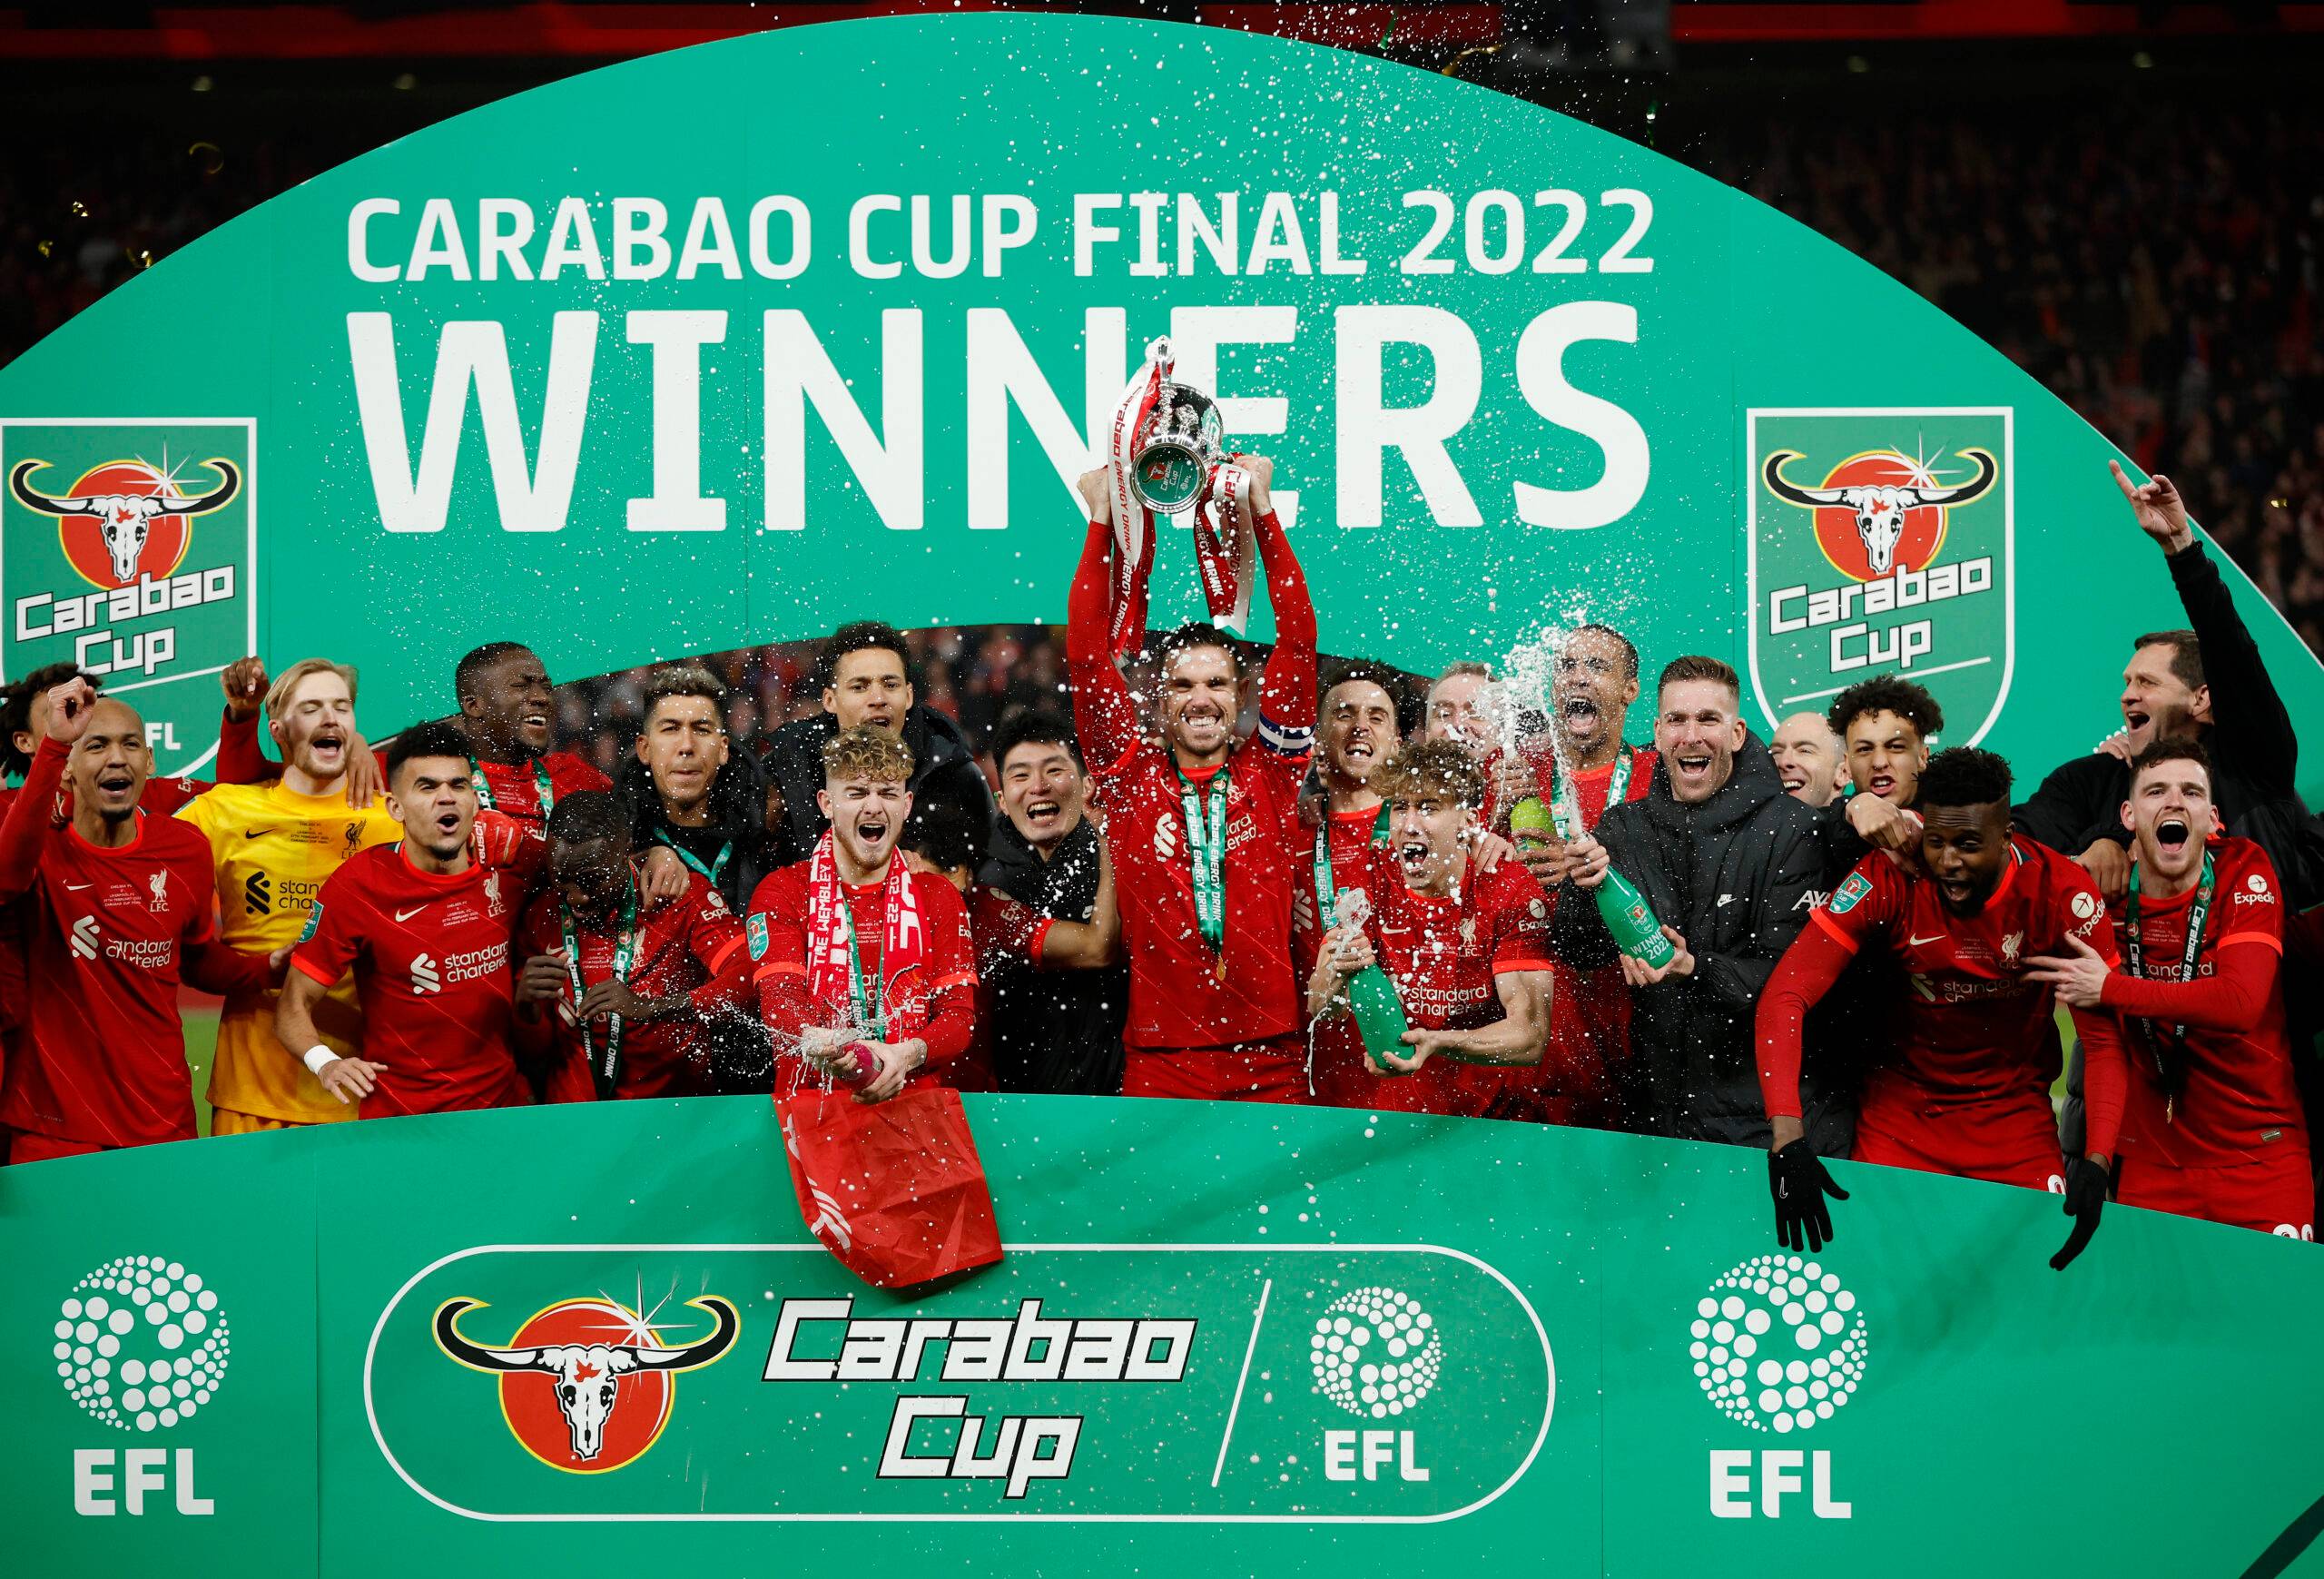 Liverpool win the Carabao Cup.